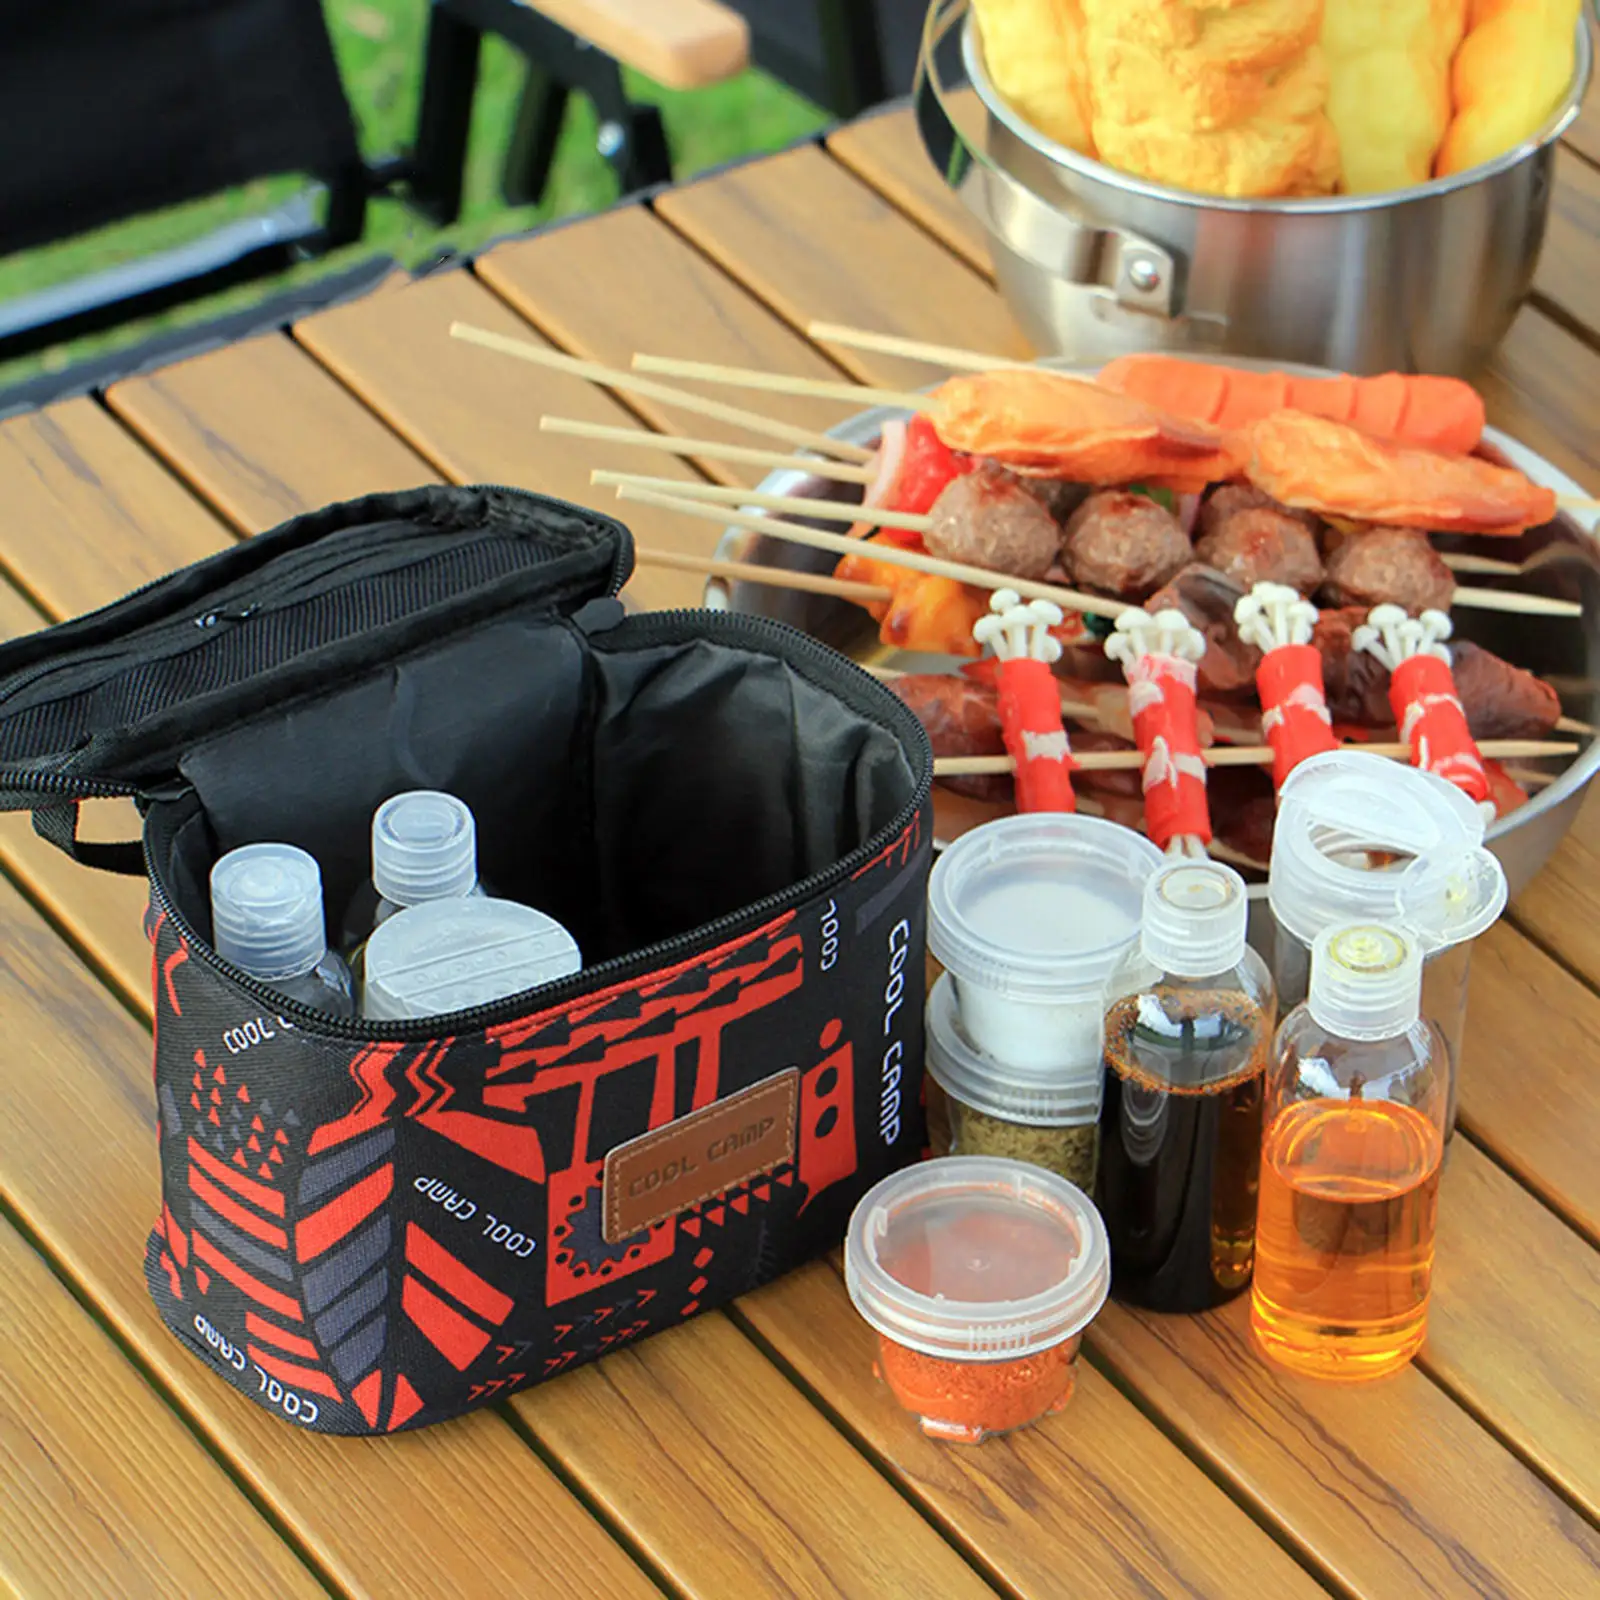 Spice Sauce Condiment Bottles Pepper Seasoning Pot For BBQ Camping Outdoor Salt Pepper Jar Herb Spice Container